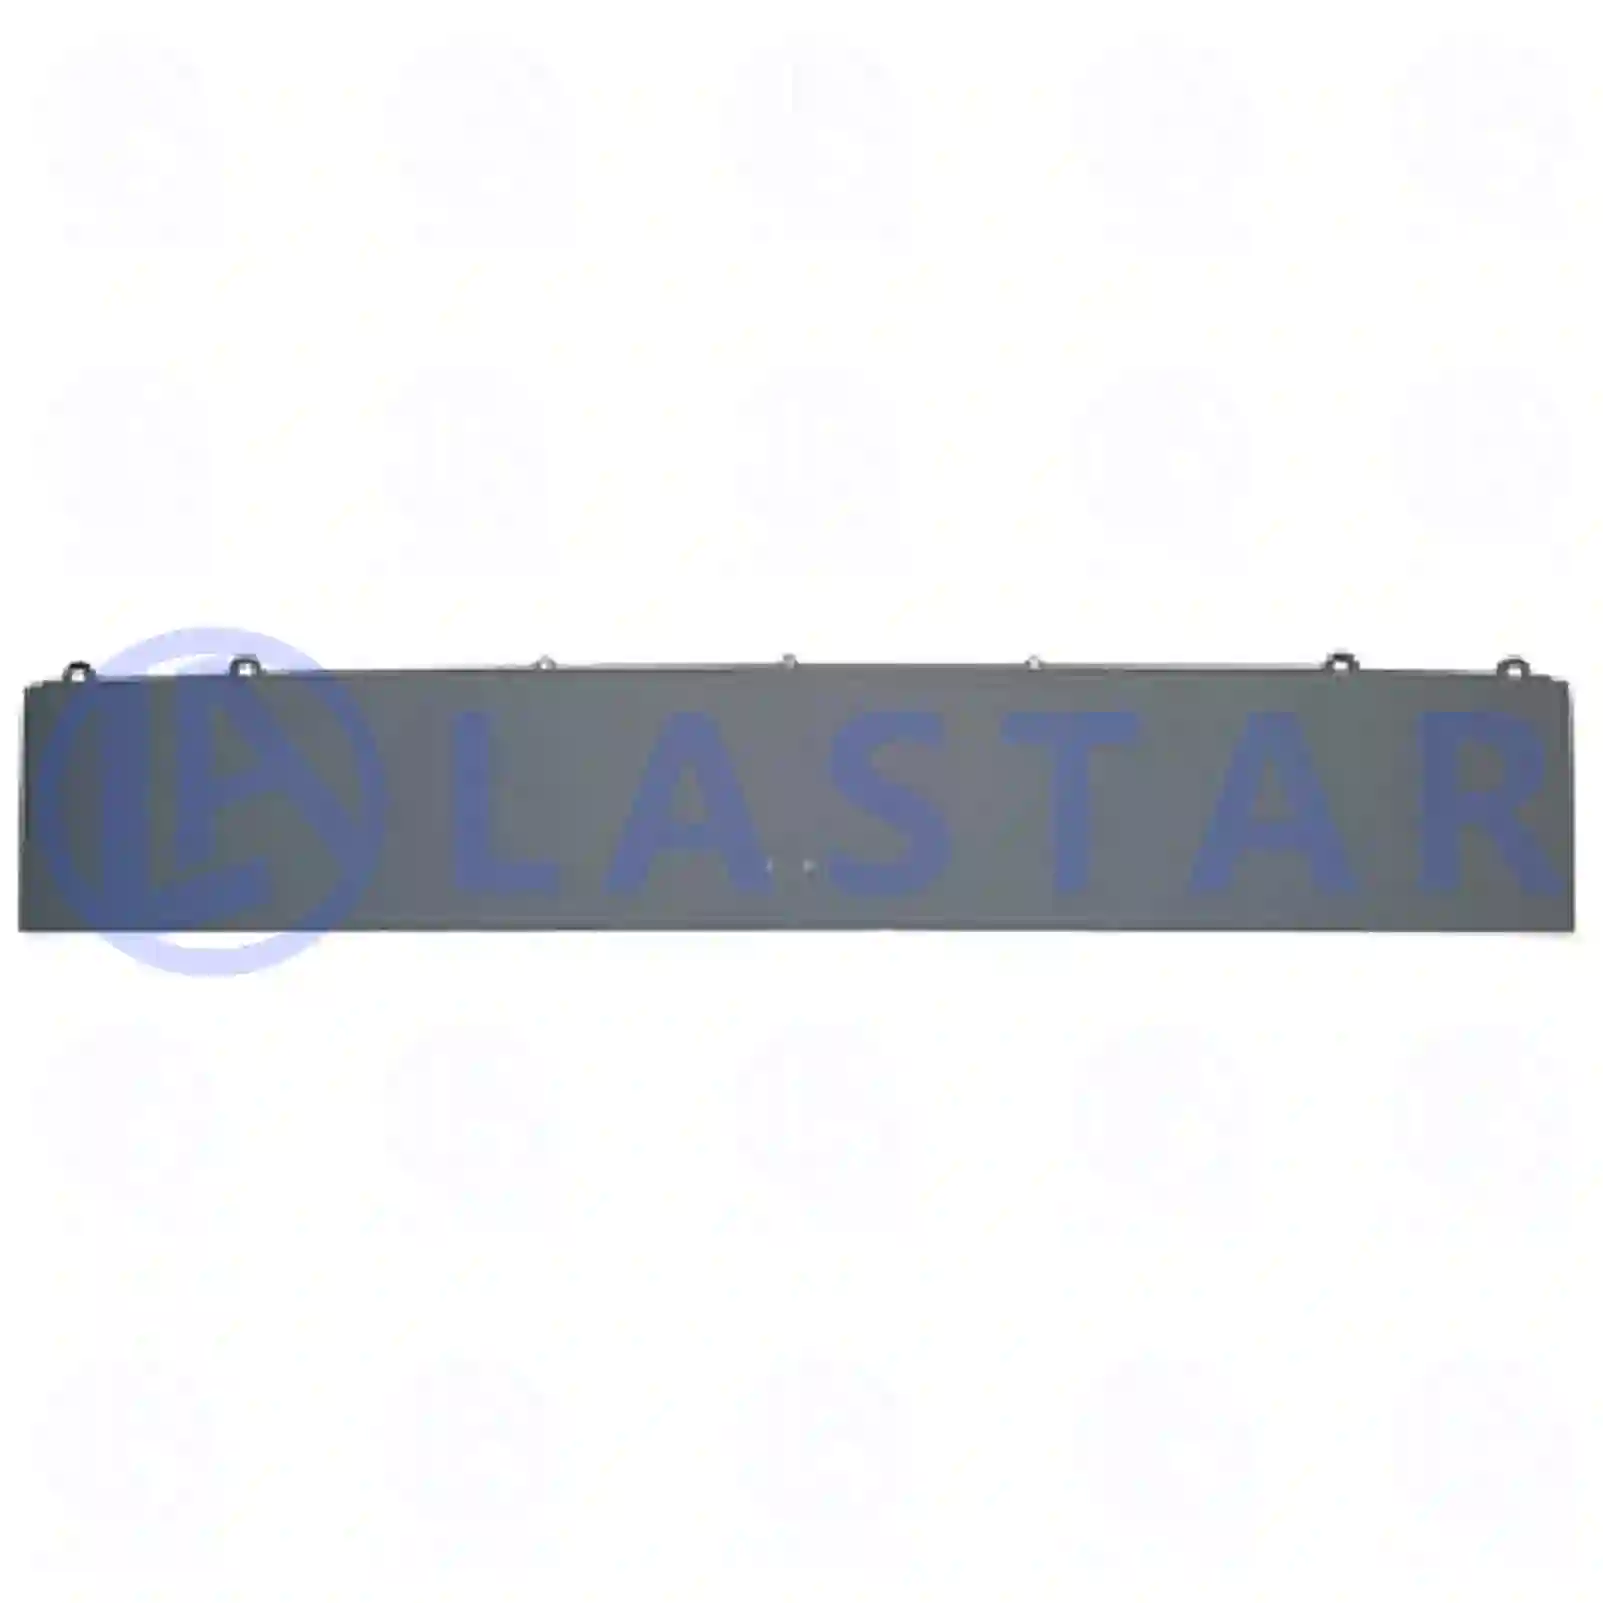 Front panel, 77718679, 9417500009 ||  77718679 Lastar Spare Part | Truck Spare Parts, Auotomotive Spare Parts Front panel, 77718679, 9417500009 ||  77718679 Lastar Spare Part | Truck Spare Parts, Auotomotive Spare Parts